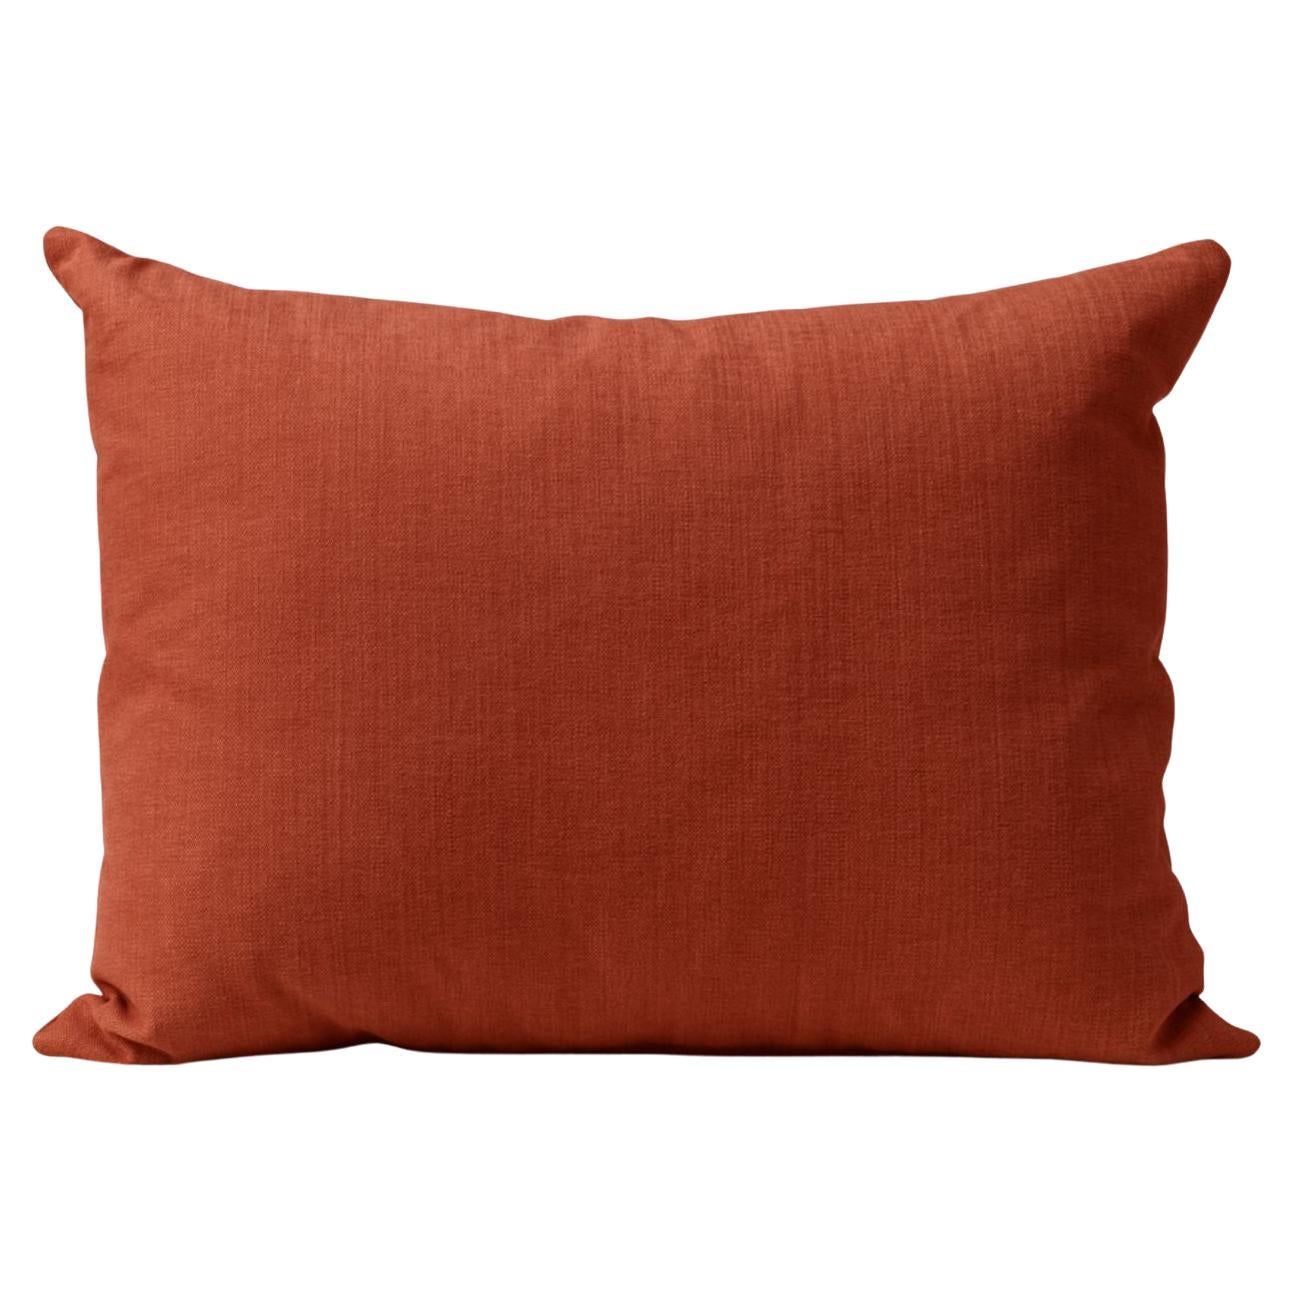 Galore Cushion Square Maple Red by Warm Nordic For Sale